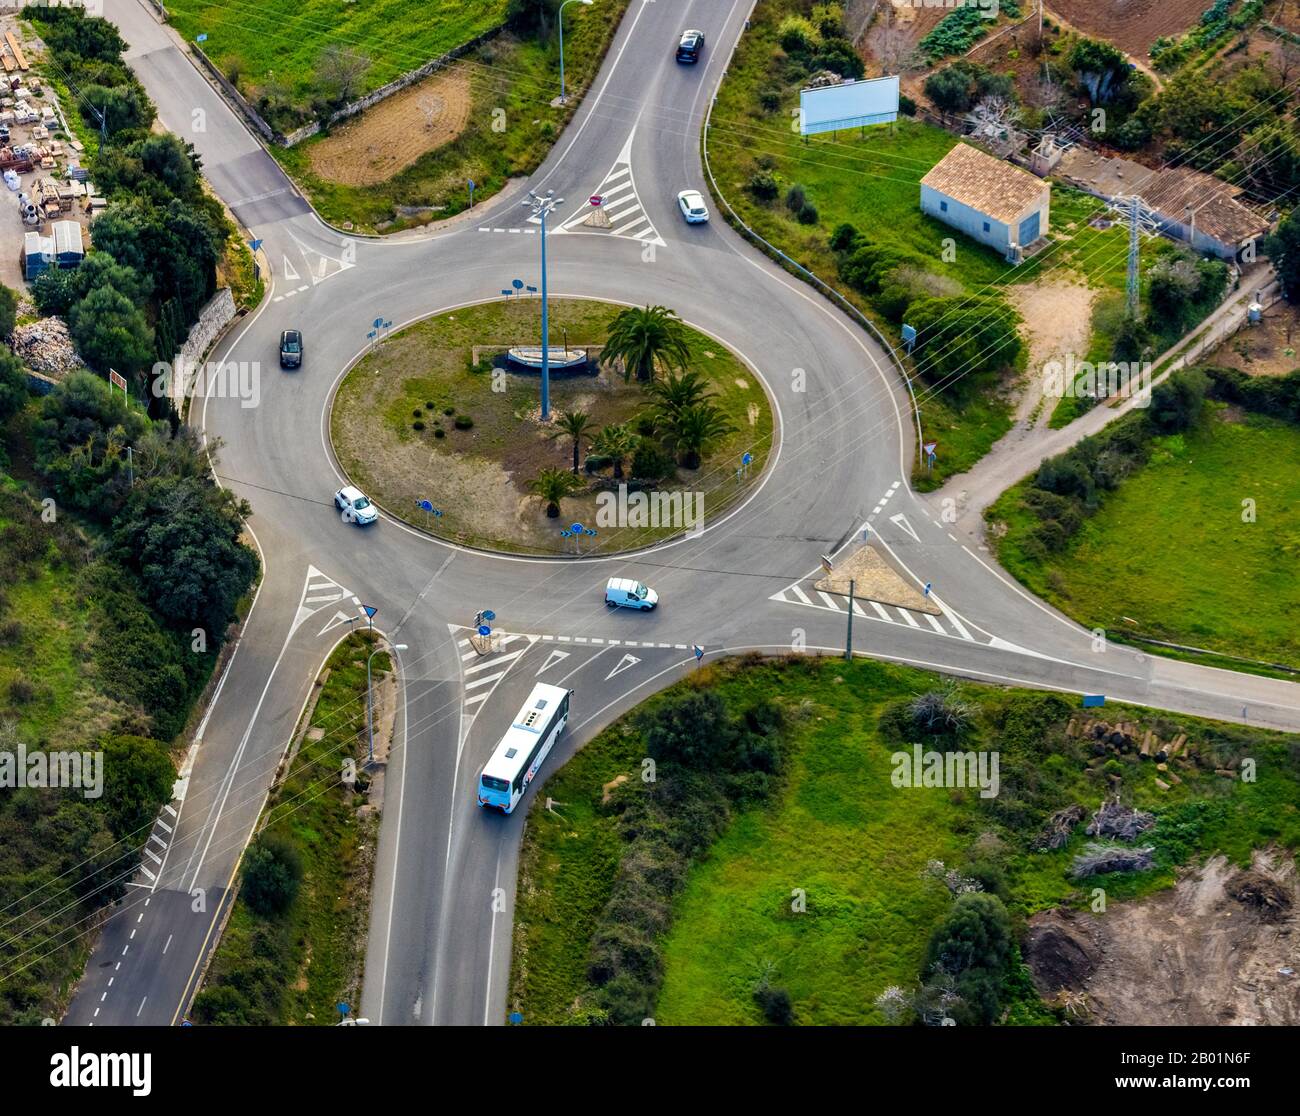 roundabout at Capdepera with palms, 09.01.2020, aerial view, Spain, Balearic Islands, Majorca, Capdepera Stock Photo